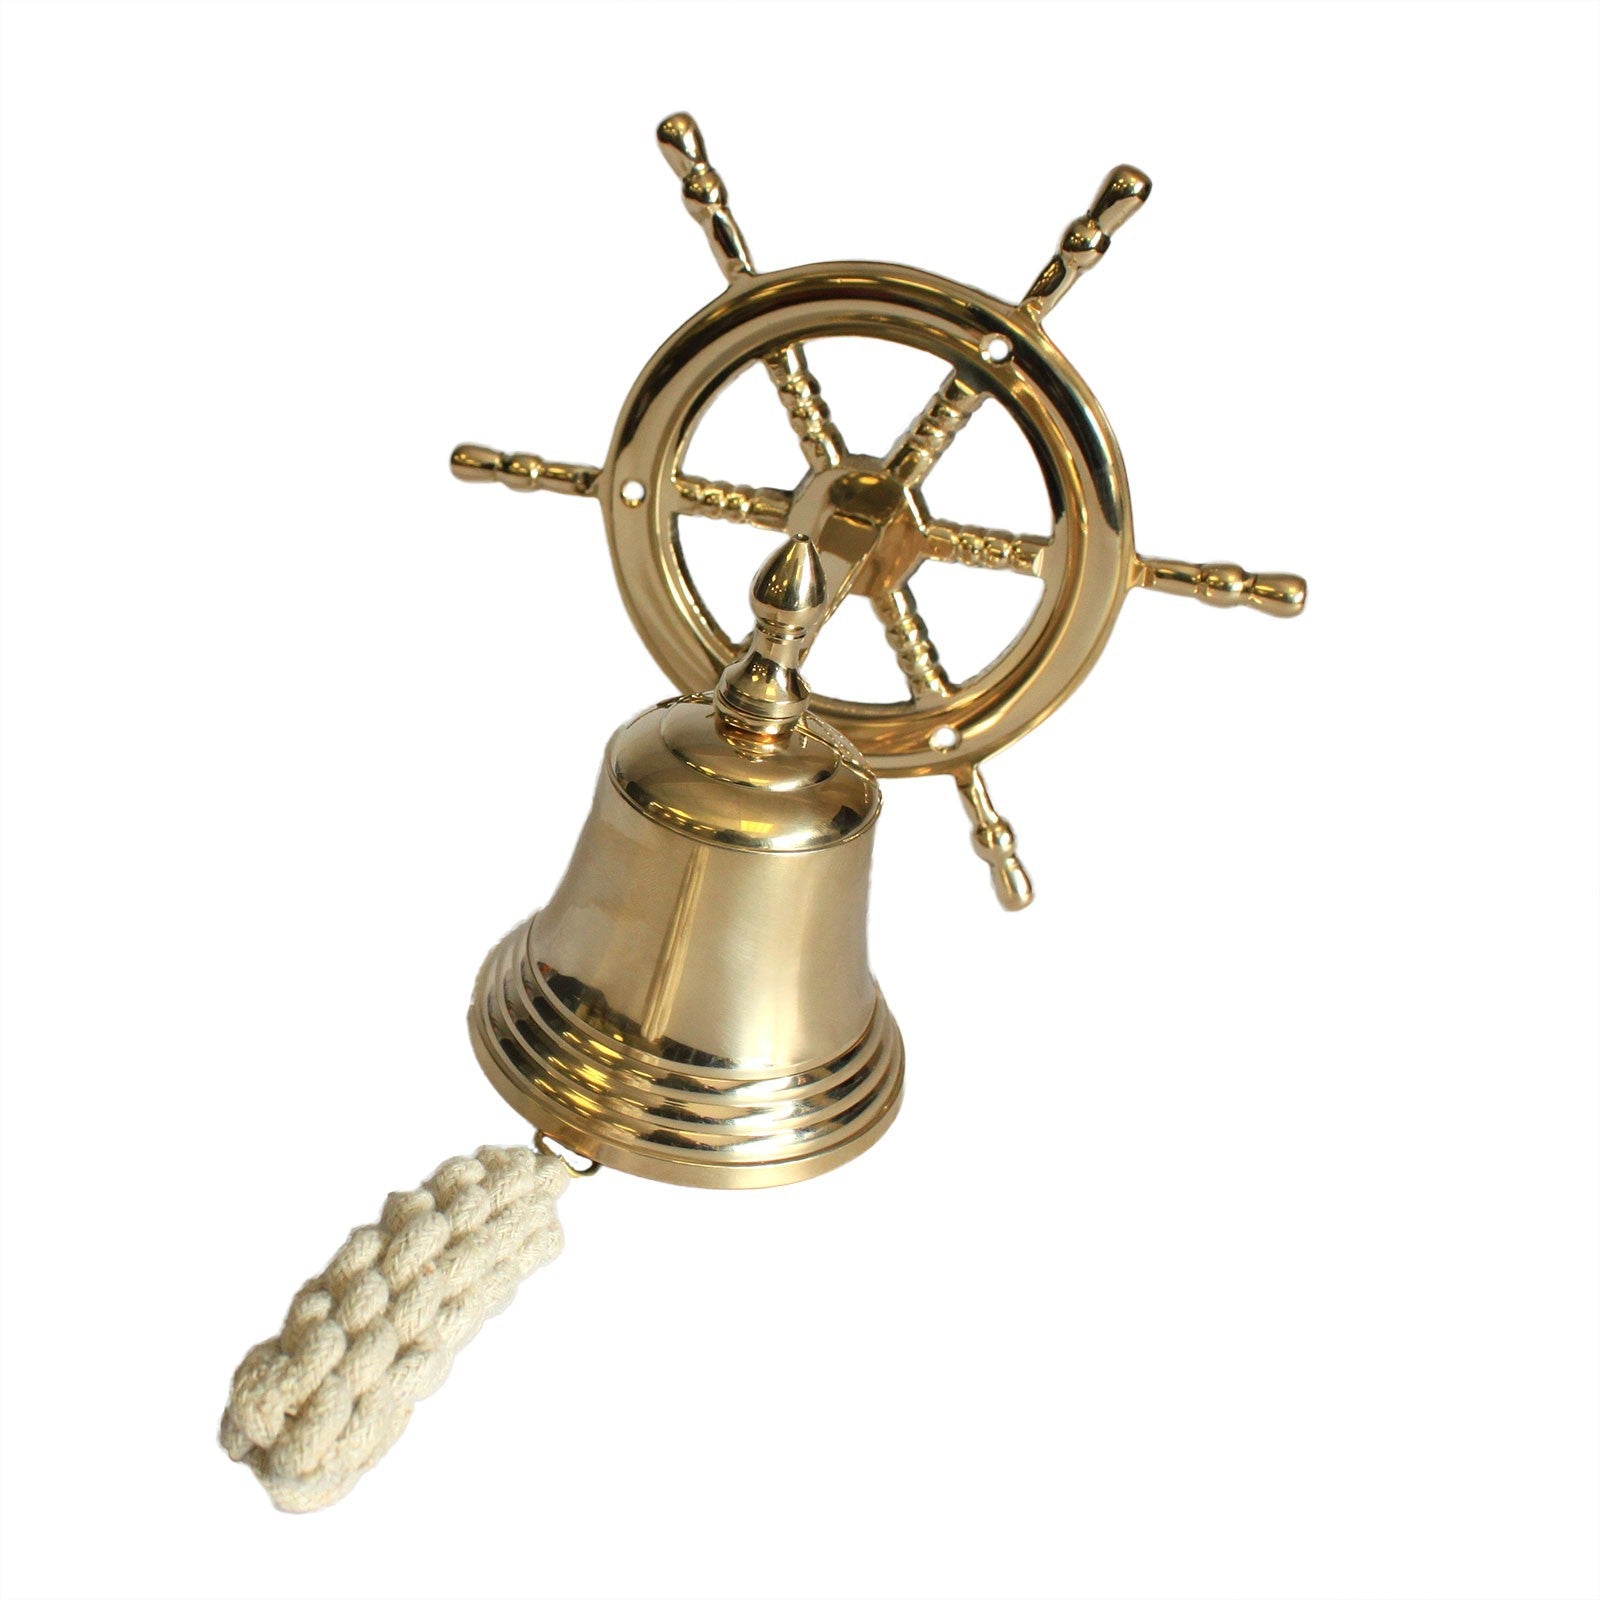 View Ships Wheel Bell information